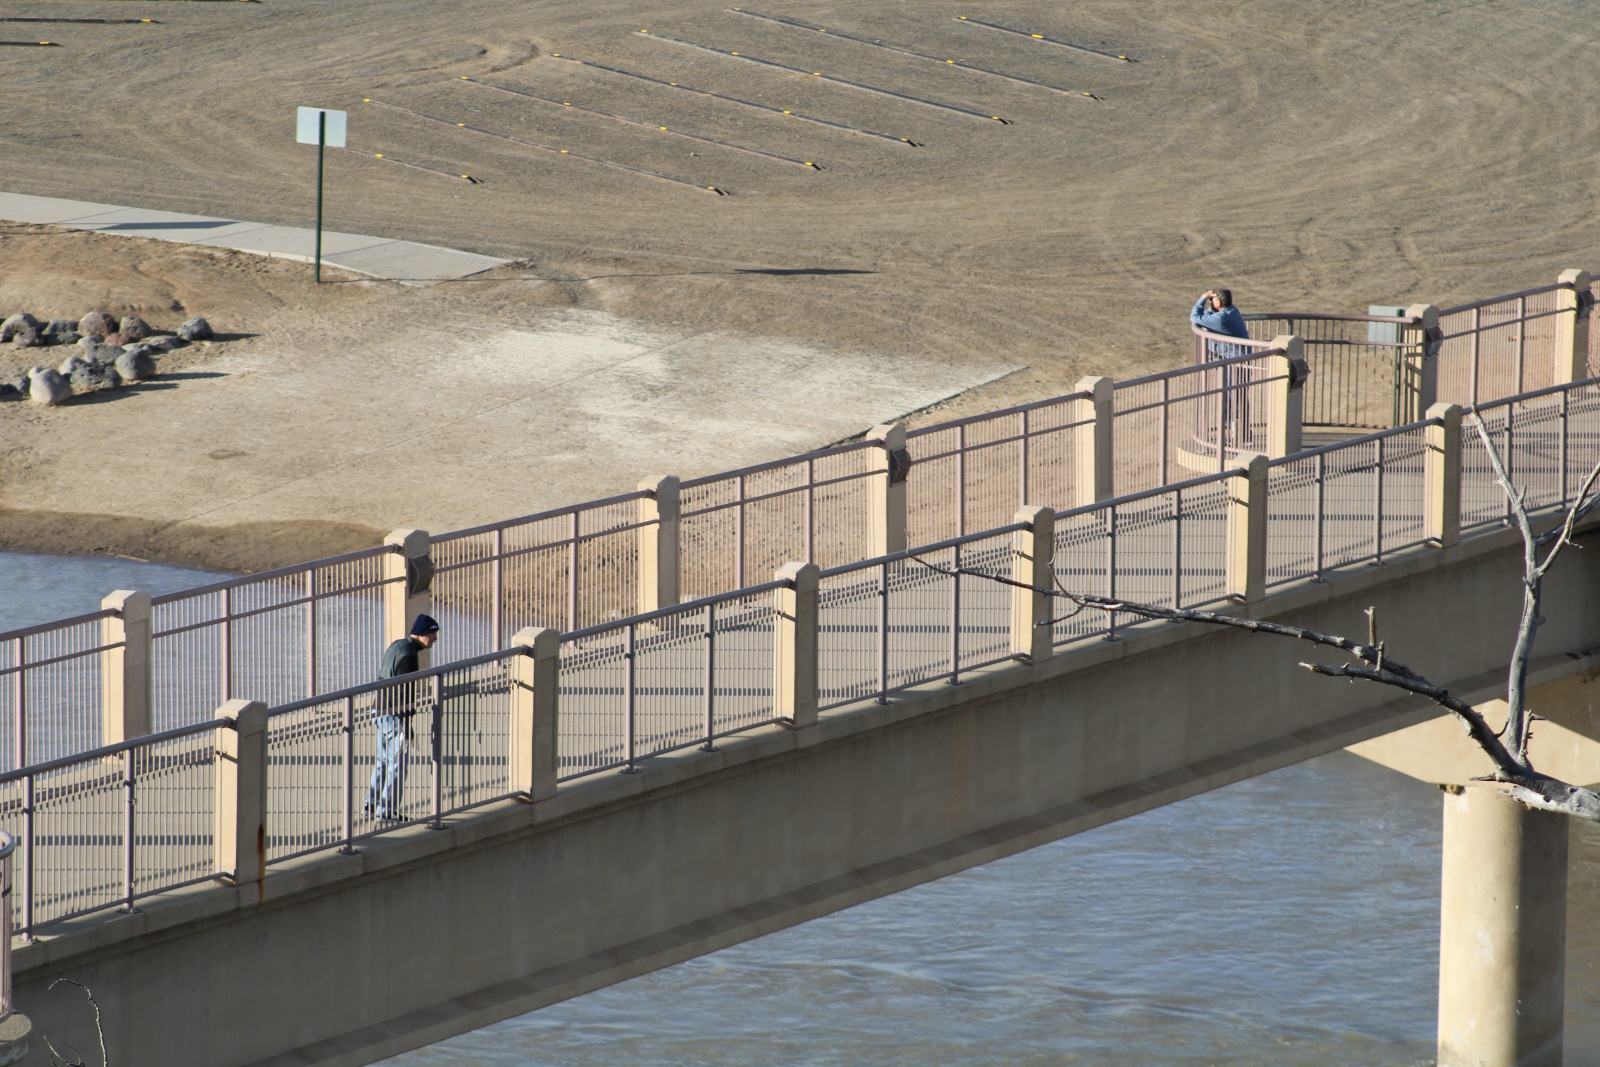 Two people walk over a narrow concrete brdige that overlooks sand and water.